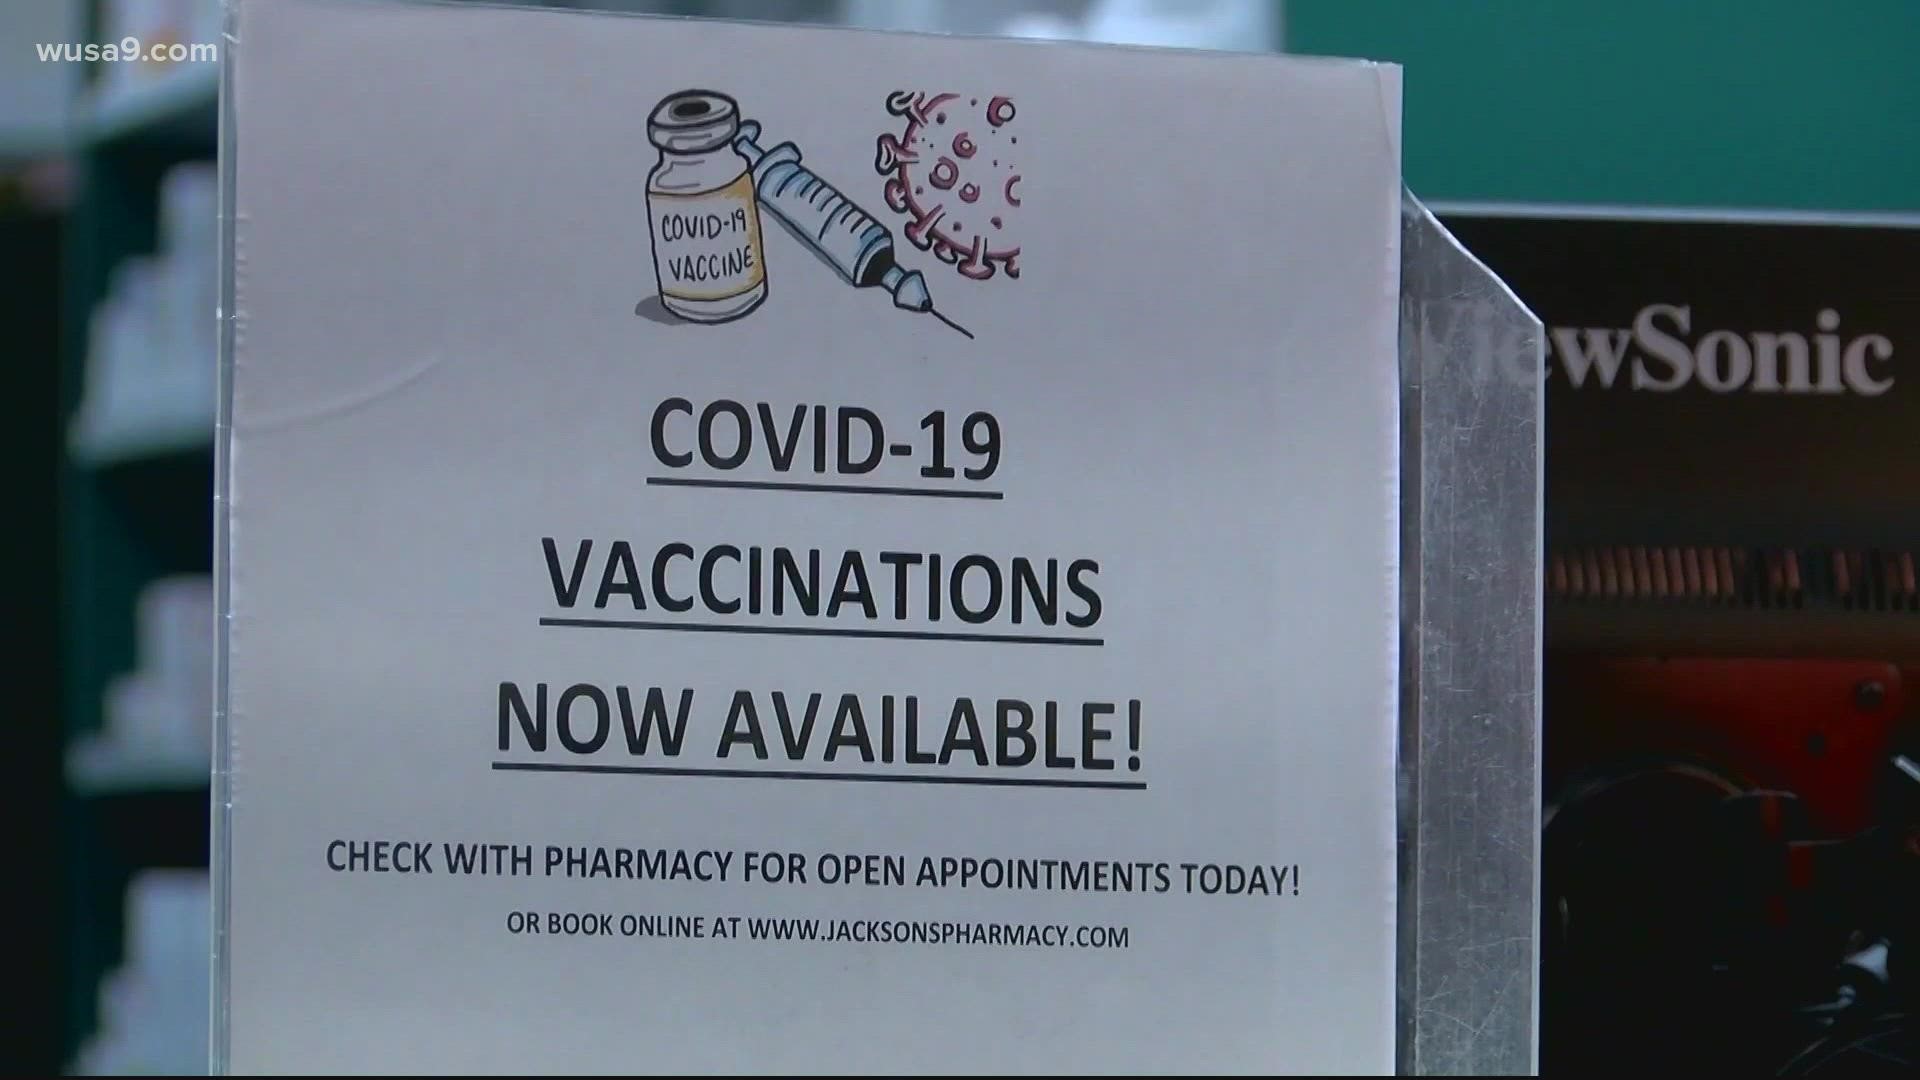 Teenagers who receive a COVID-19 shot in Maryland could win a $50,000 college scholarship.